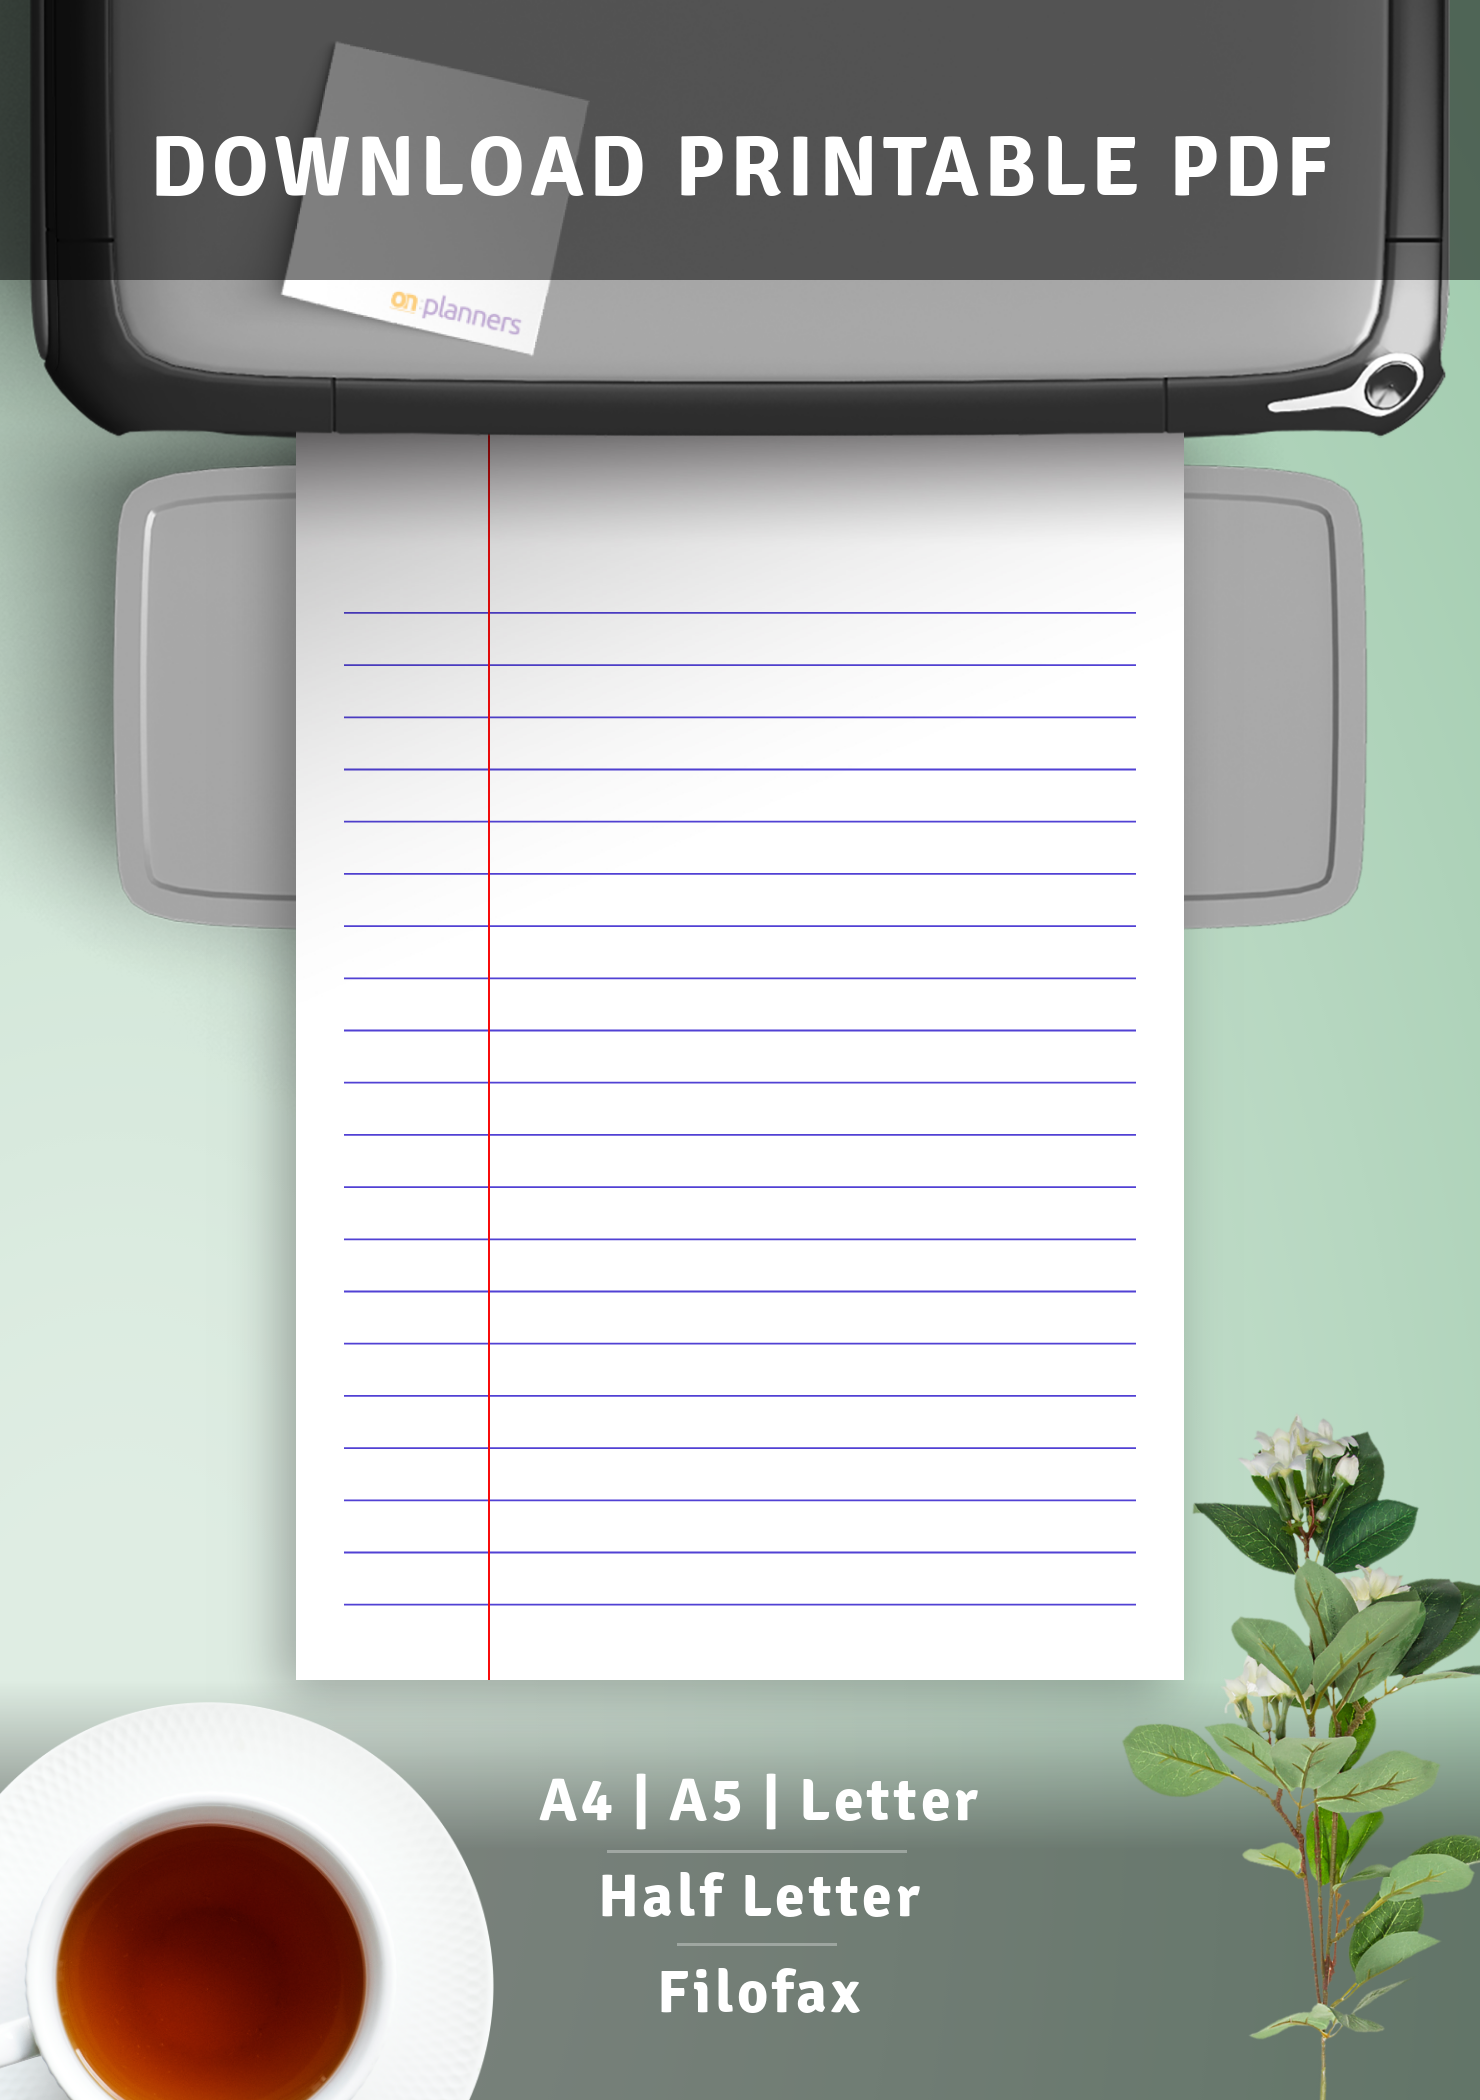 narrow-ruled-lined-paper-on-a4-sized-paper-in-landscape-orientation-free-printable-lined-paper